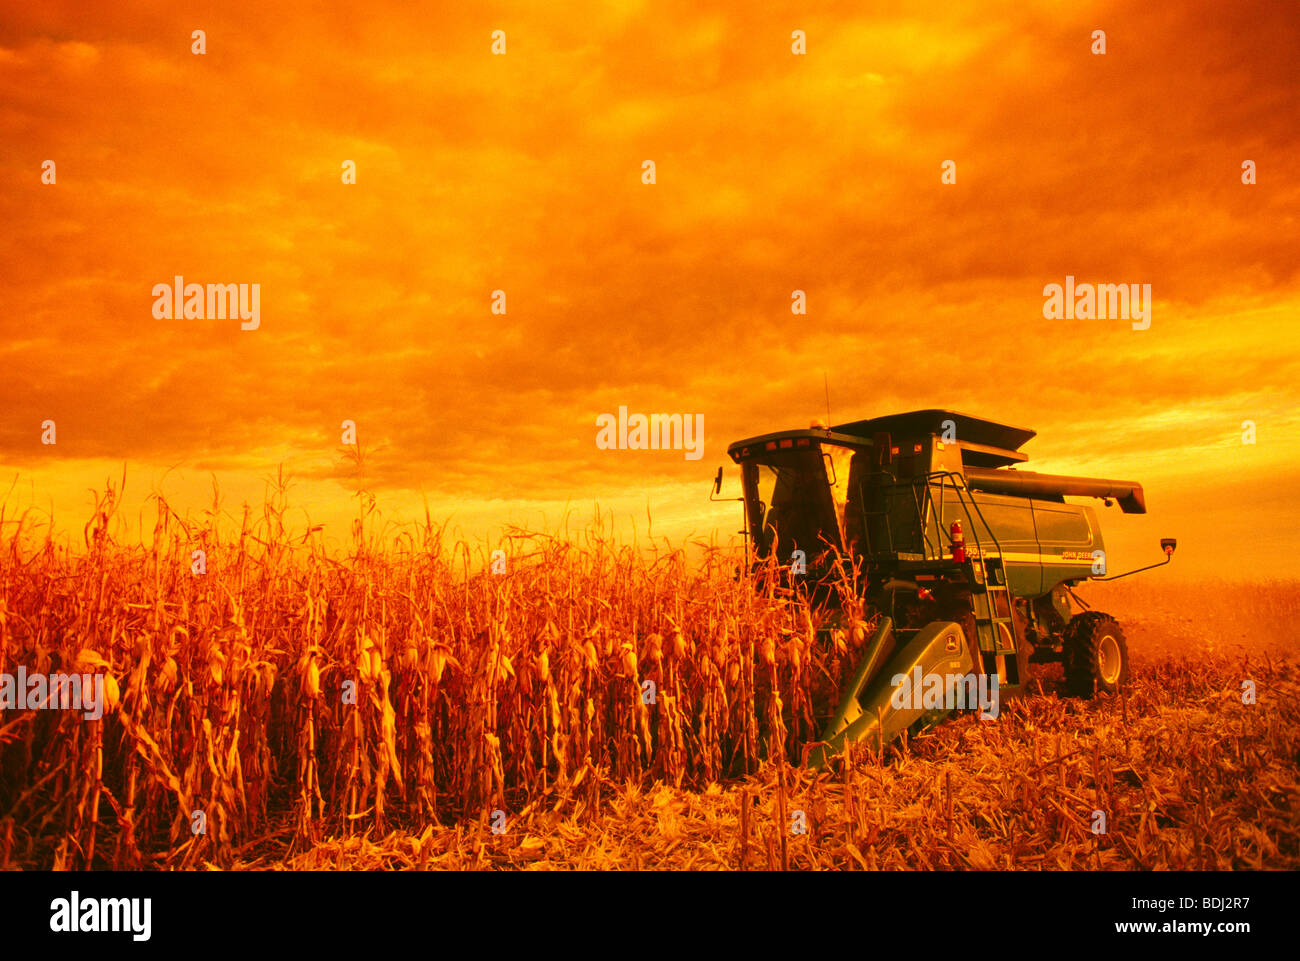 Agriculture - A combine harvests a mature grain corn crop at sunset / near Niverville, Manitoba, Canada. Stock Photo